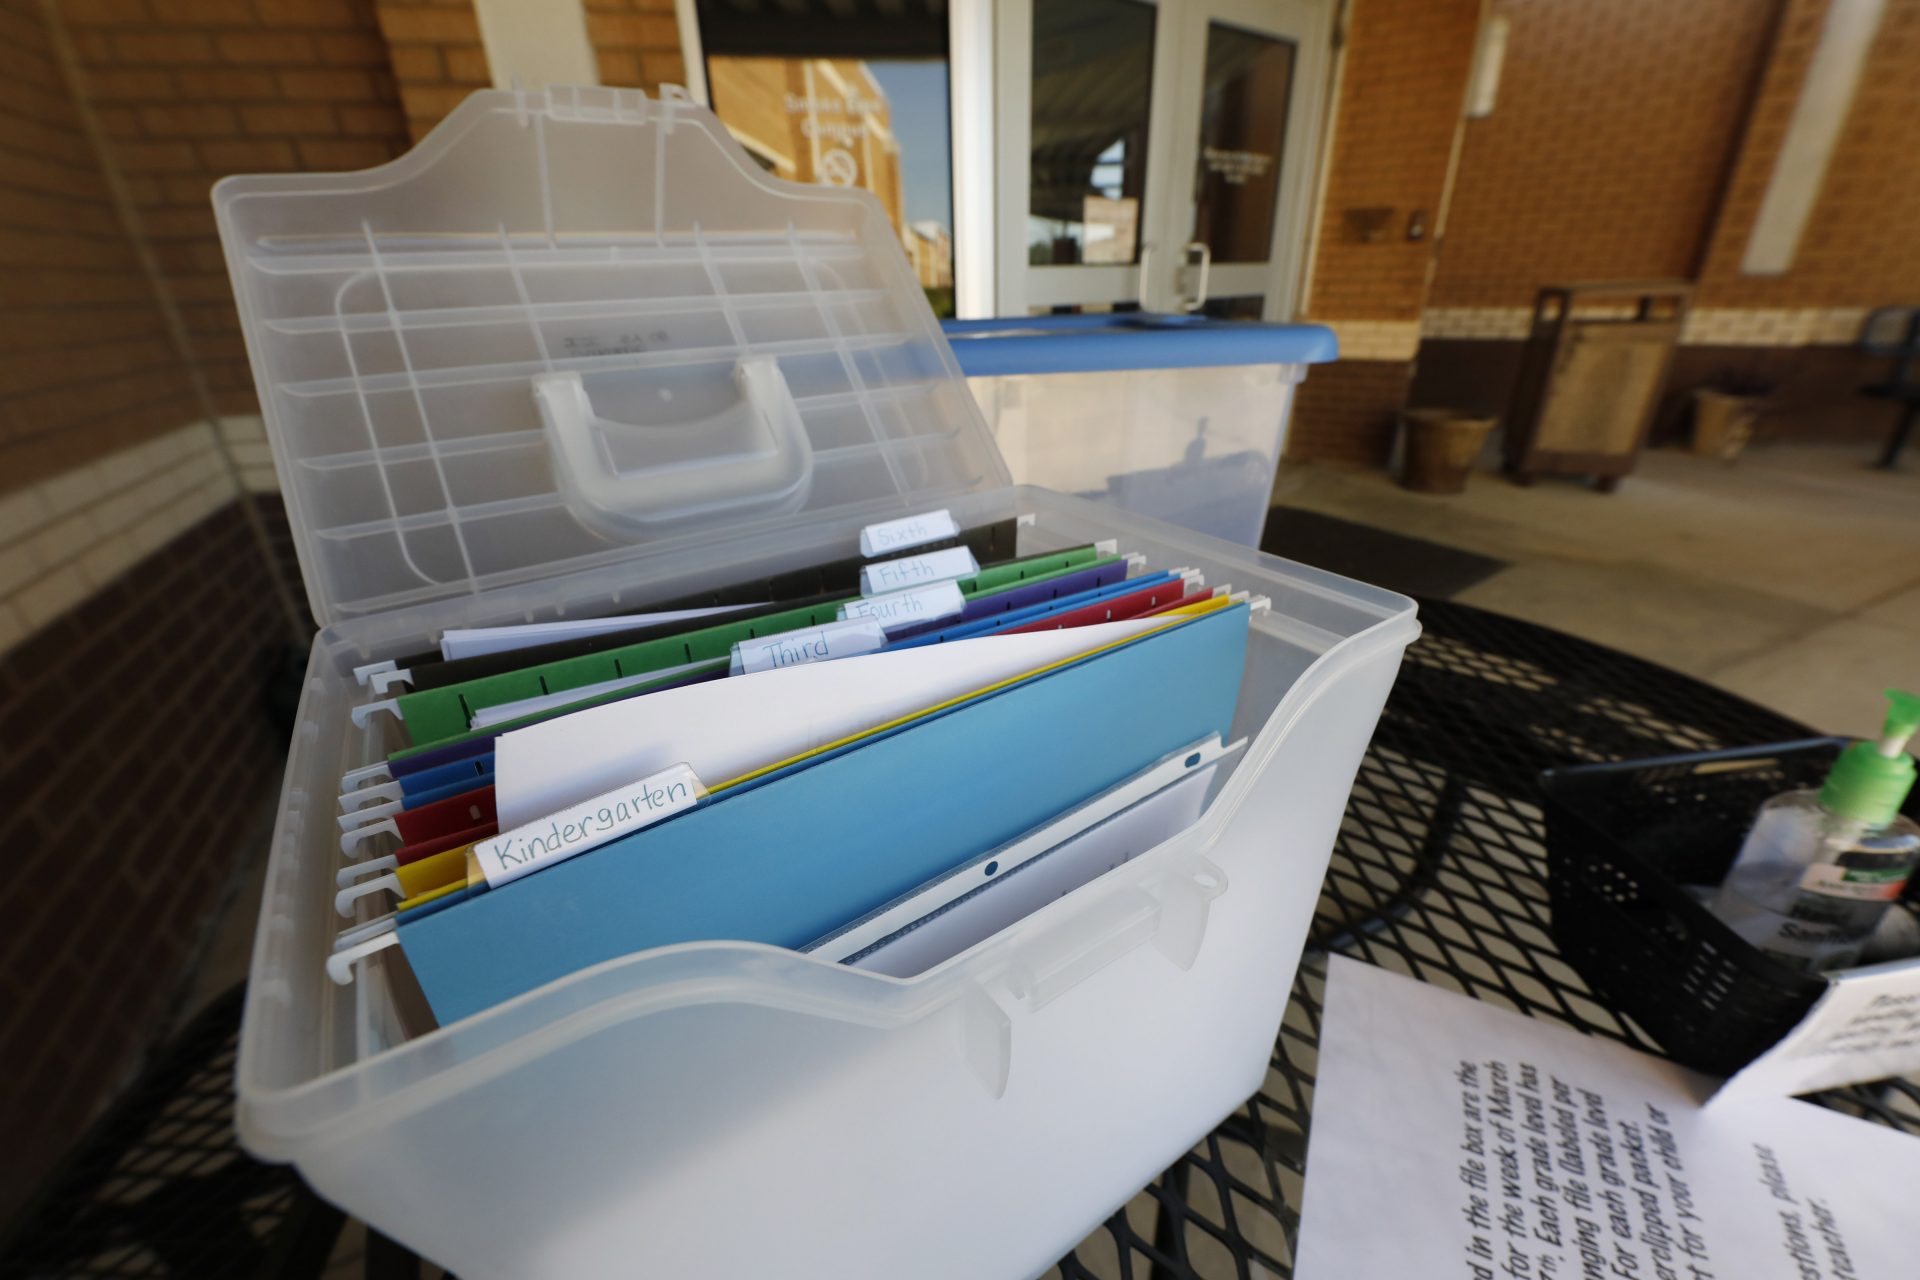 FILE - In this Thursday, March 26, 2020, file photo, grade-appropriate paper homework packets are arranged in a plastic file container awaiting parent pickup at the front of the Oakdale Elementary School in Brandon, Miss. Because of the fear of spreading the new coronavirus, schools have suspended on-site classes and are dealing with the new world of online teaching while trying to provide educational materials to those students who do not possess computers or smartphones with data capability, have limited or no internet service or simply live in a rural locale with a school that has limited digital options.